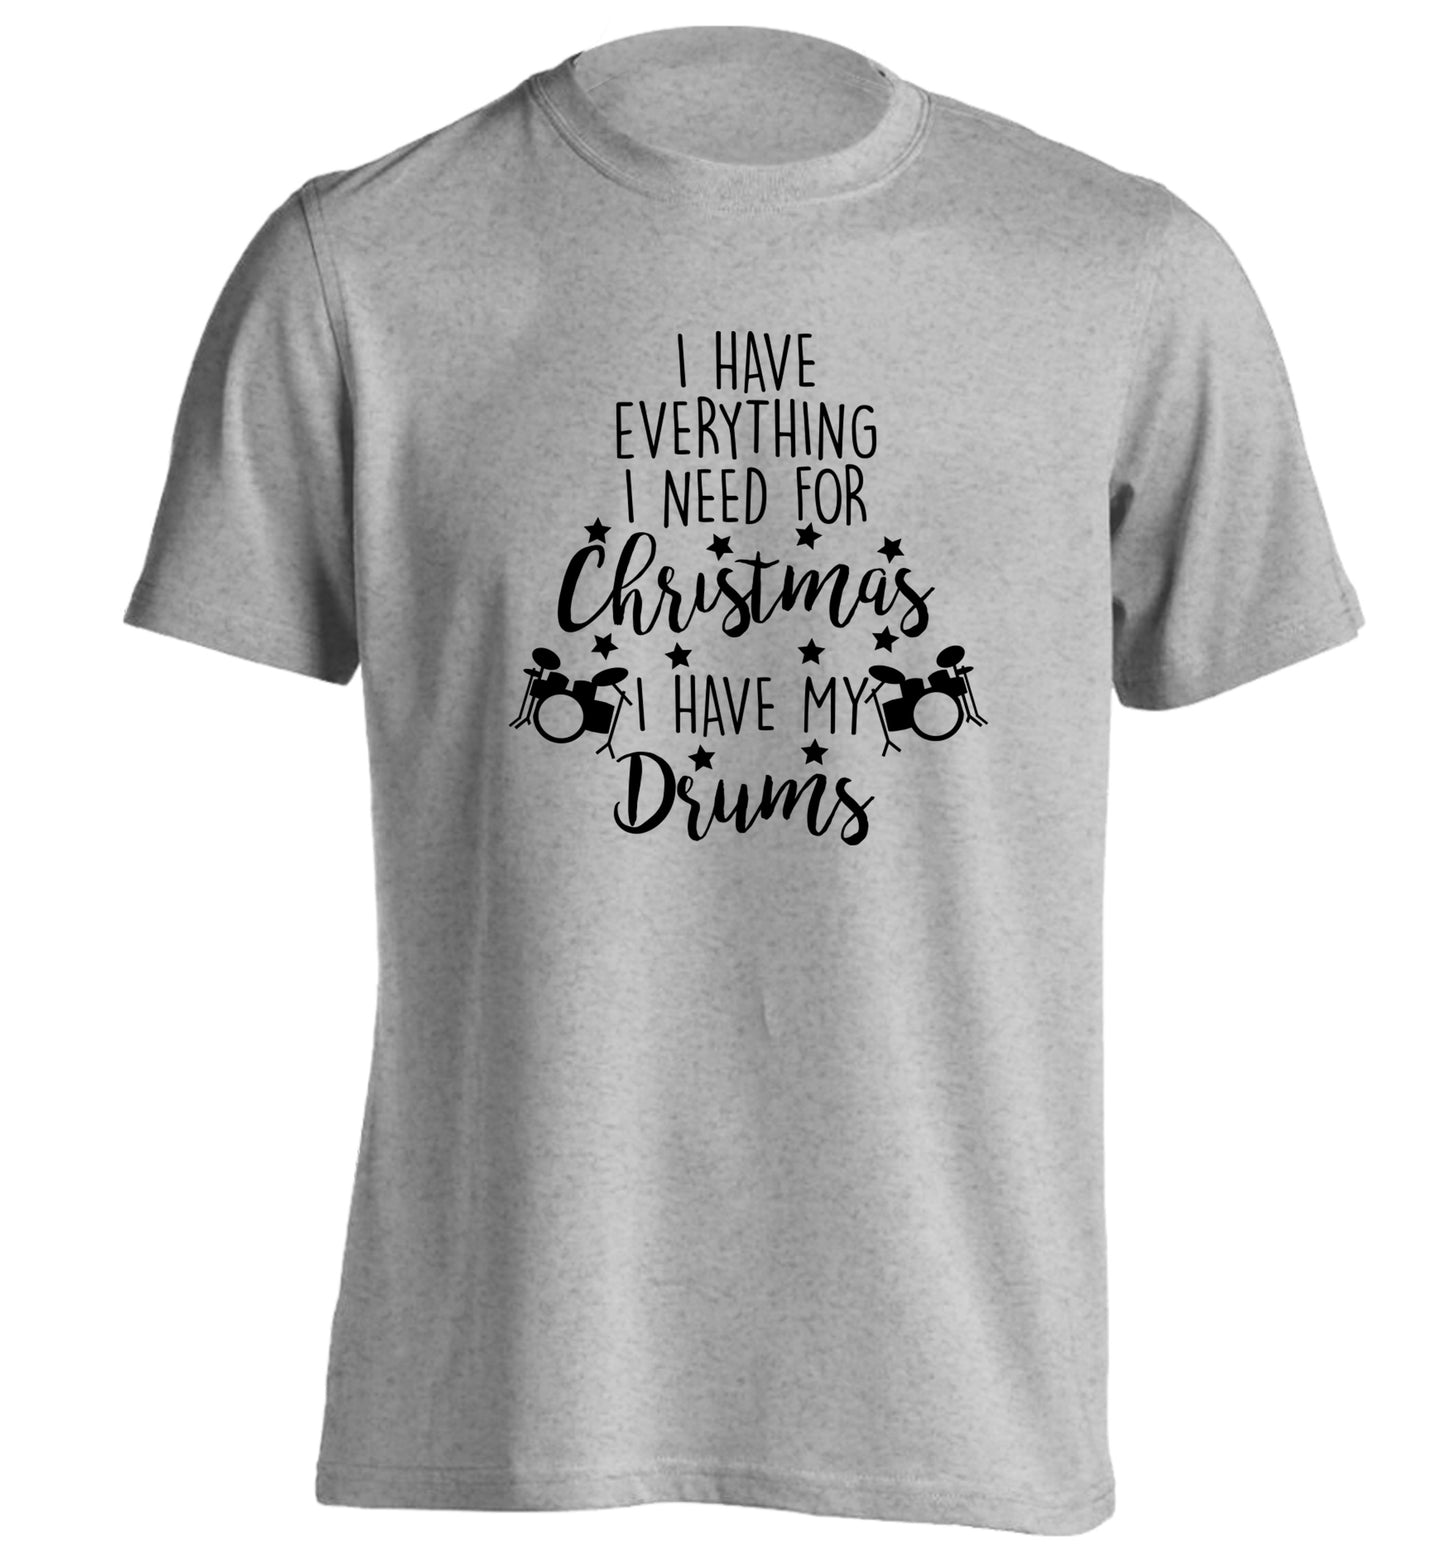 I have everything I need for Christmas I have my drums! adults unisex grey Tshirt 2XL